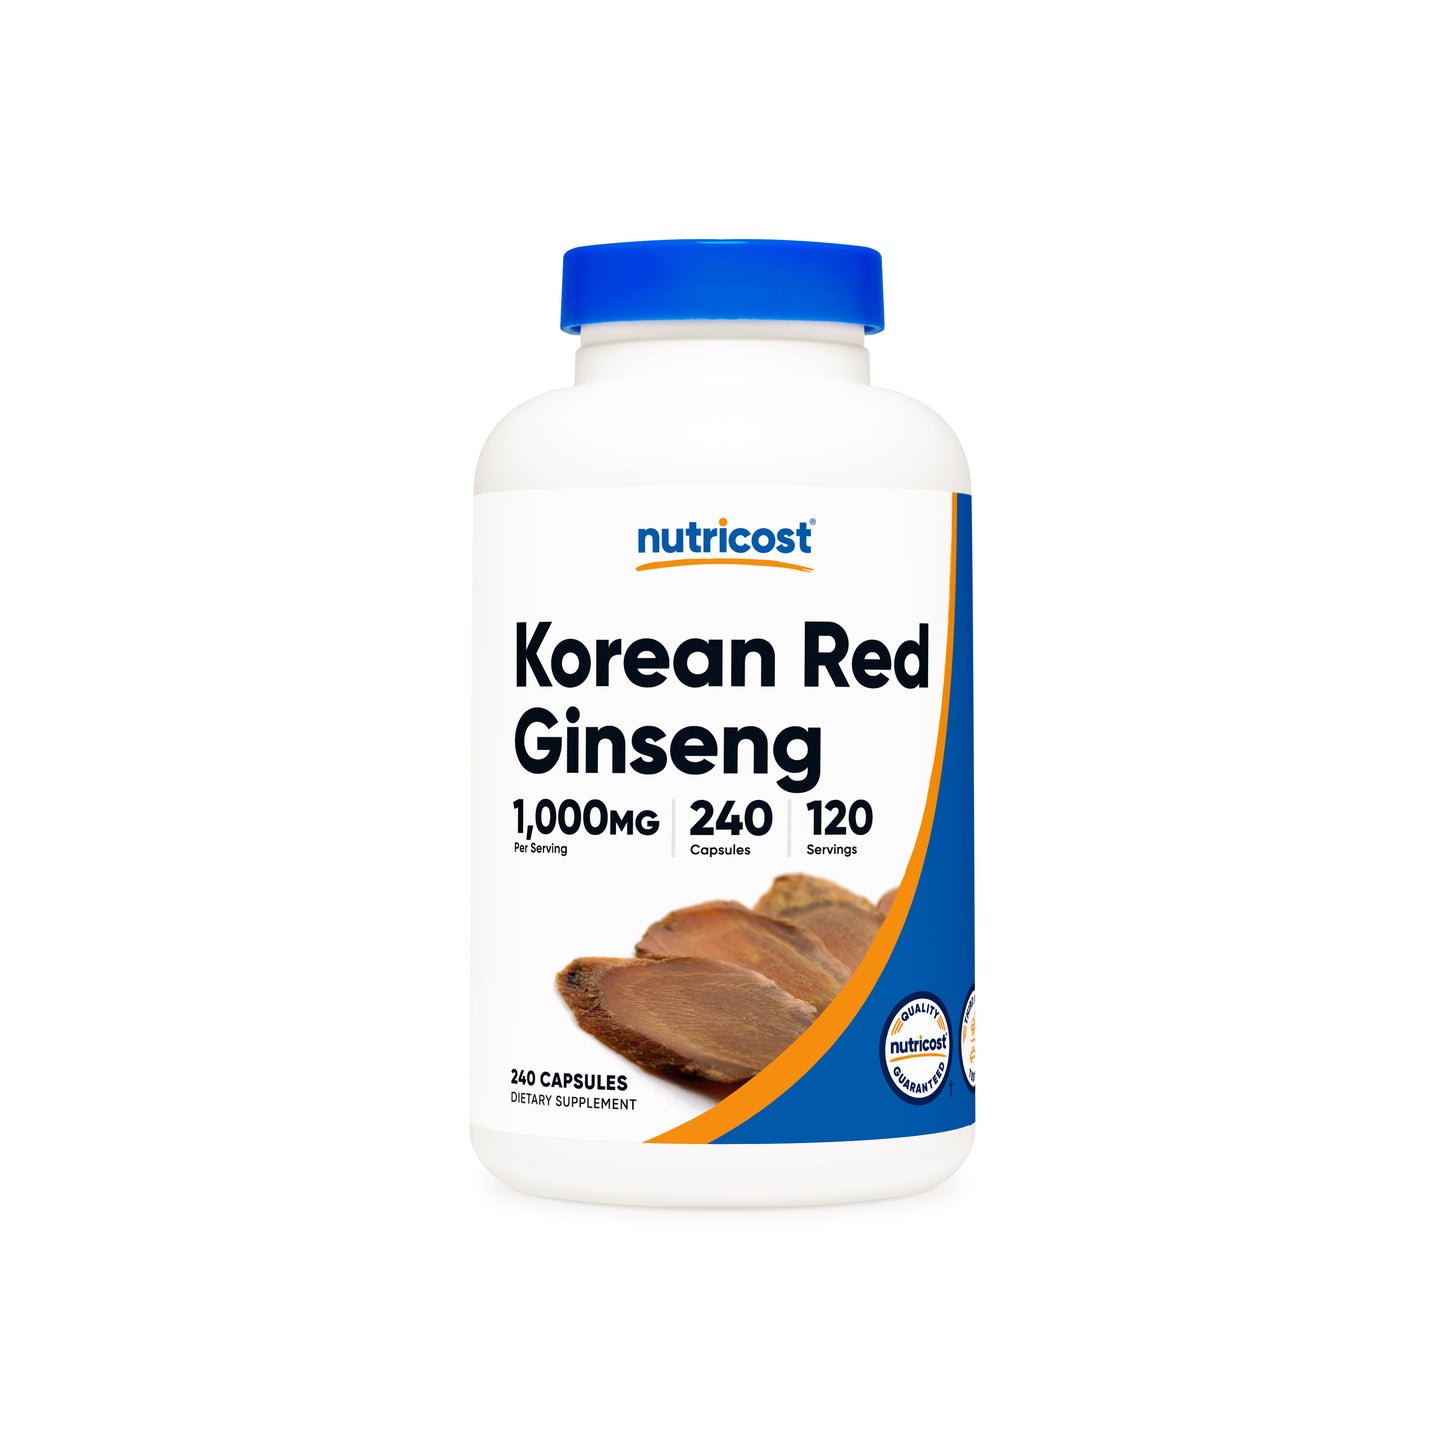 Nutricost Korean Red Ginseng Capsules